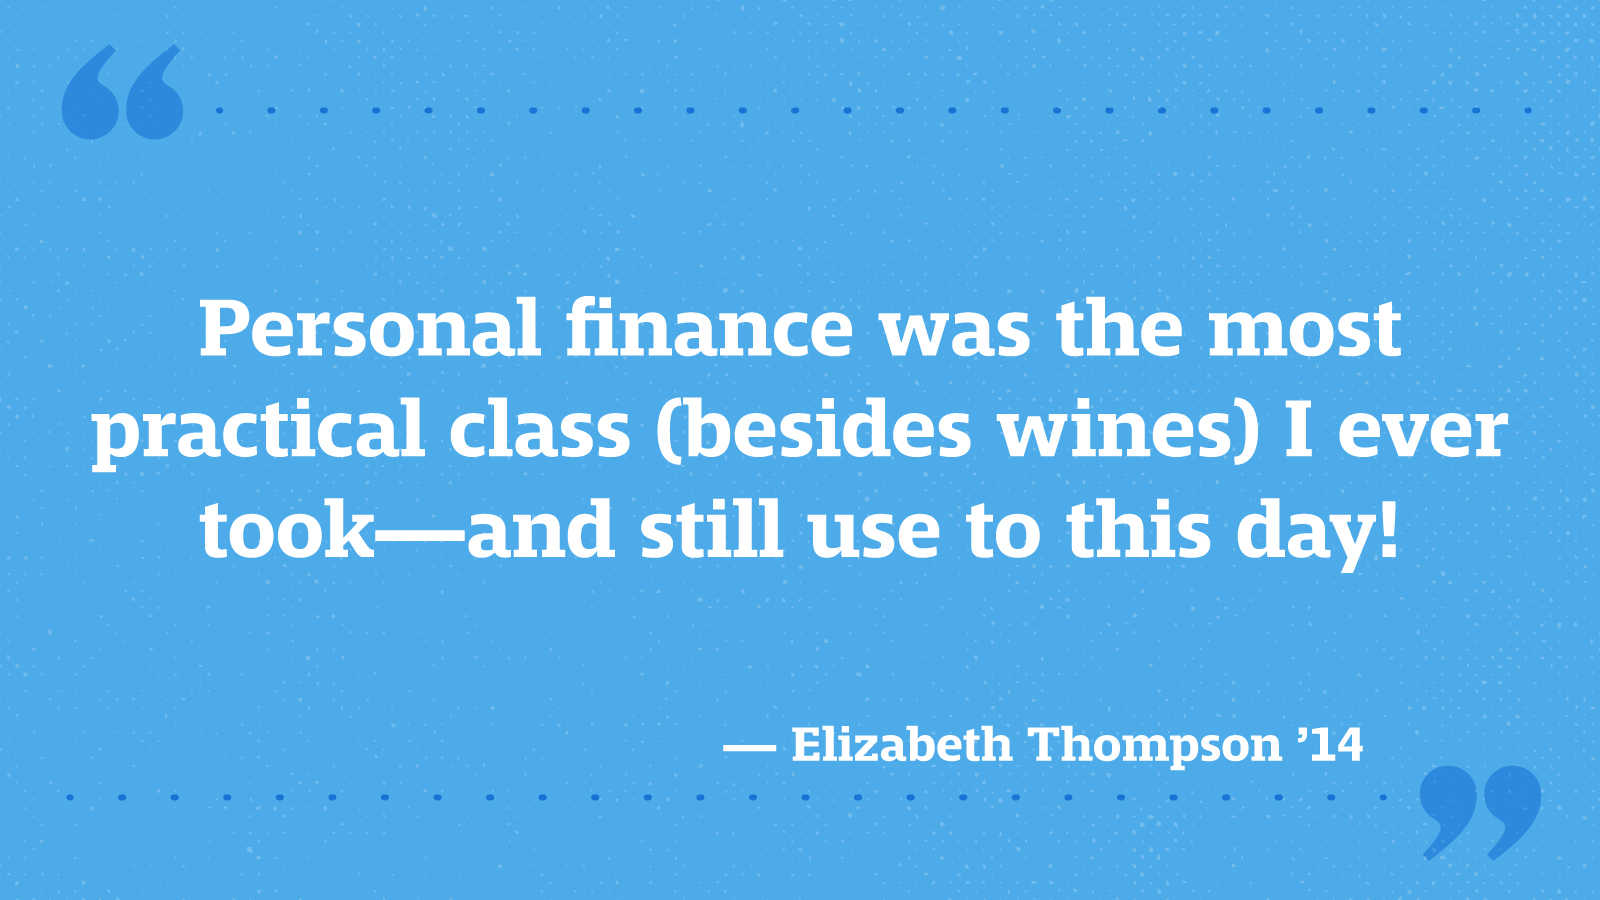 Personal finance was the most practical class (besides wines) I ever took—and still use to this day! — Elizabeth Thompson ’14